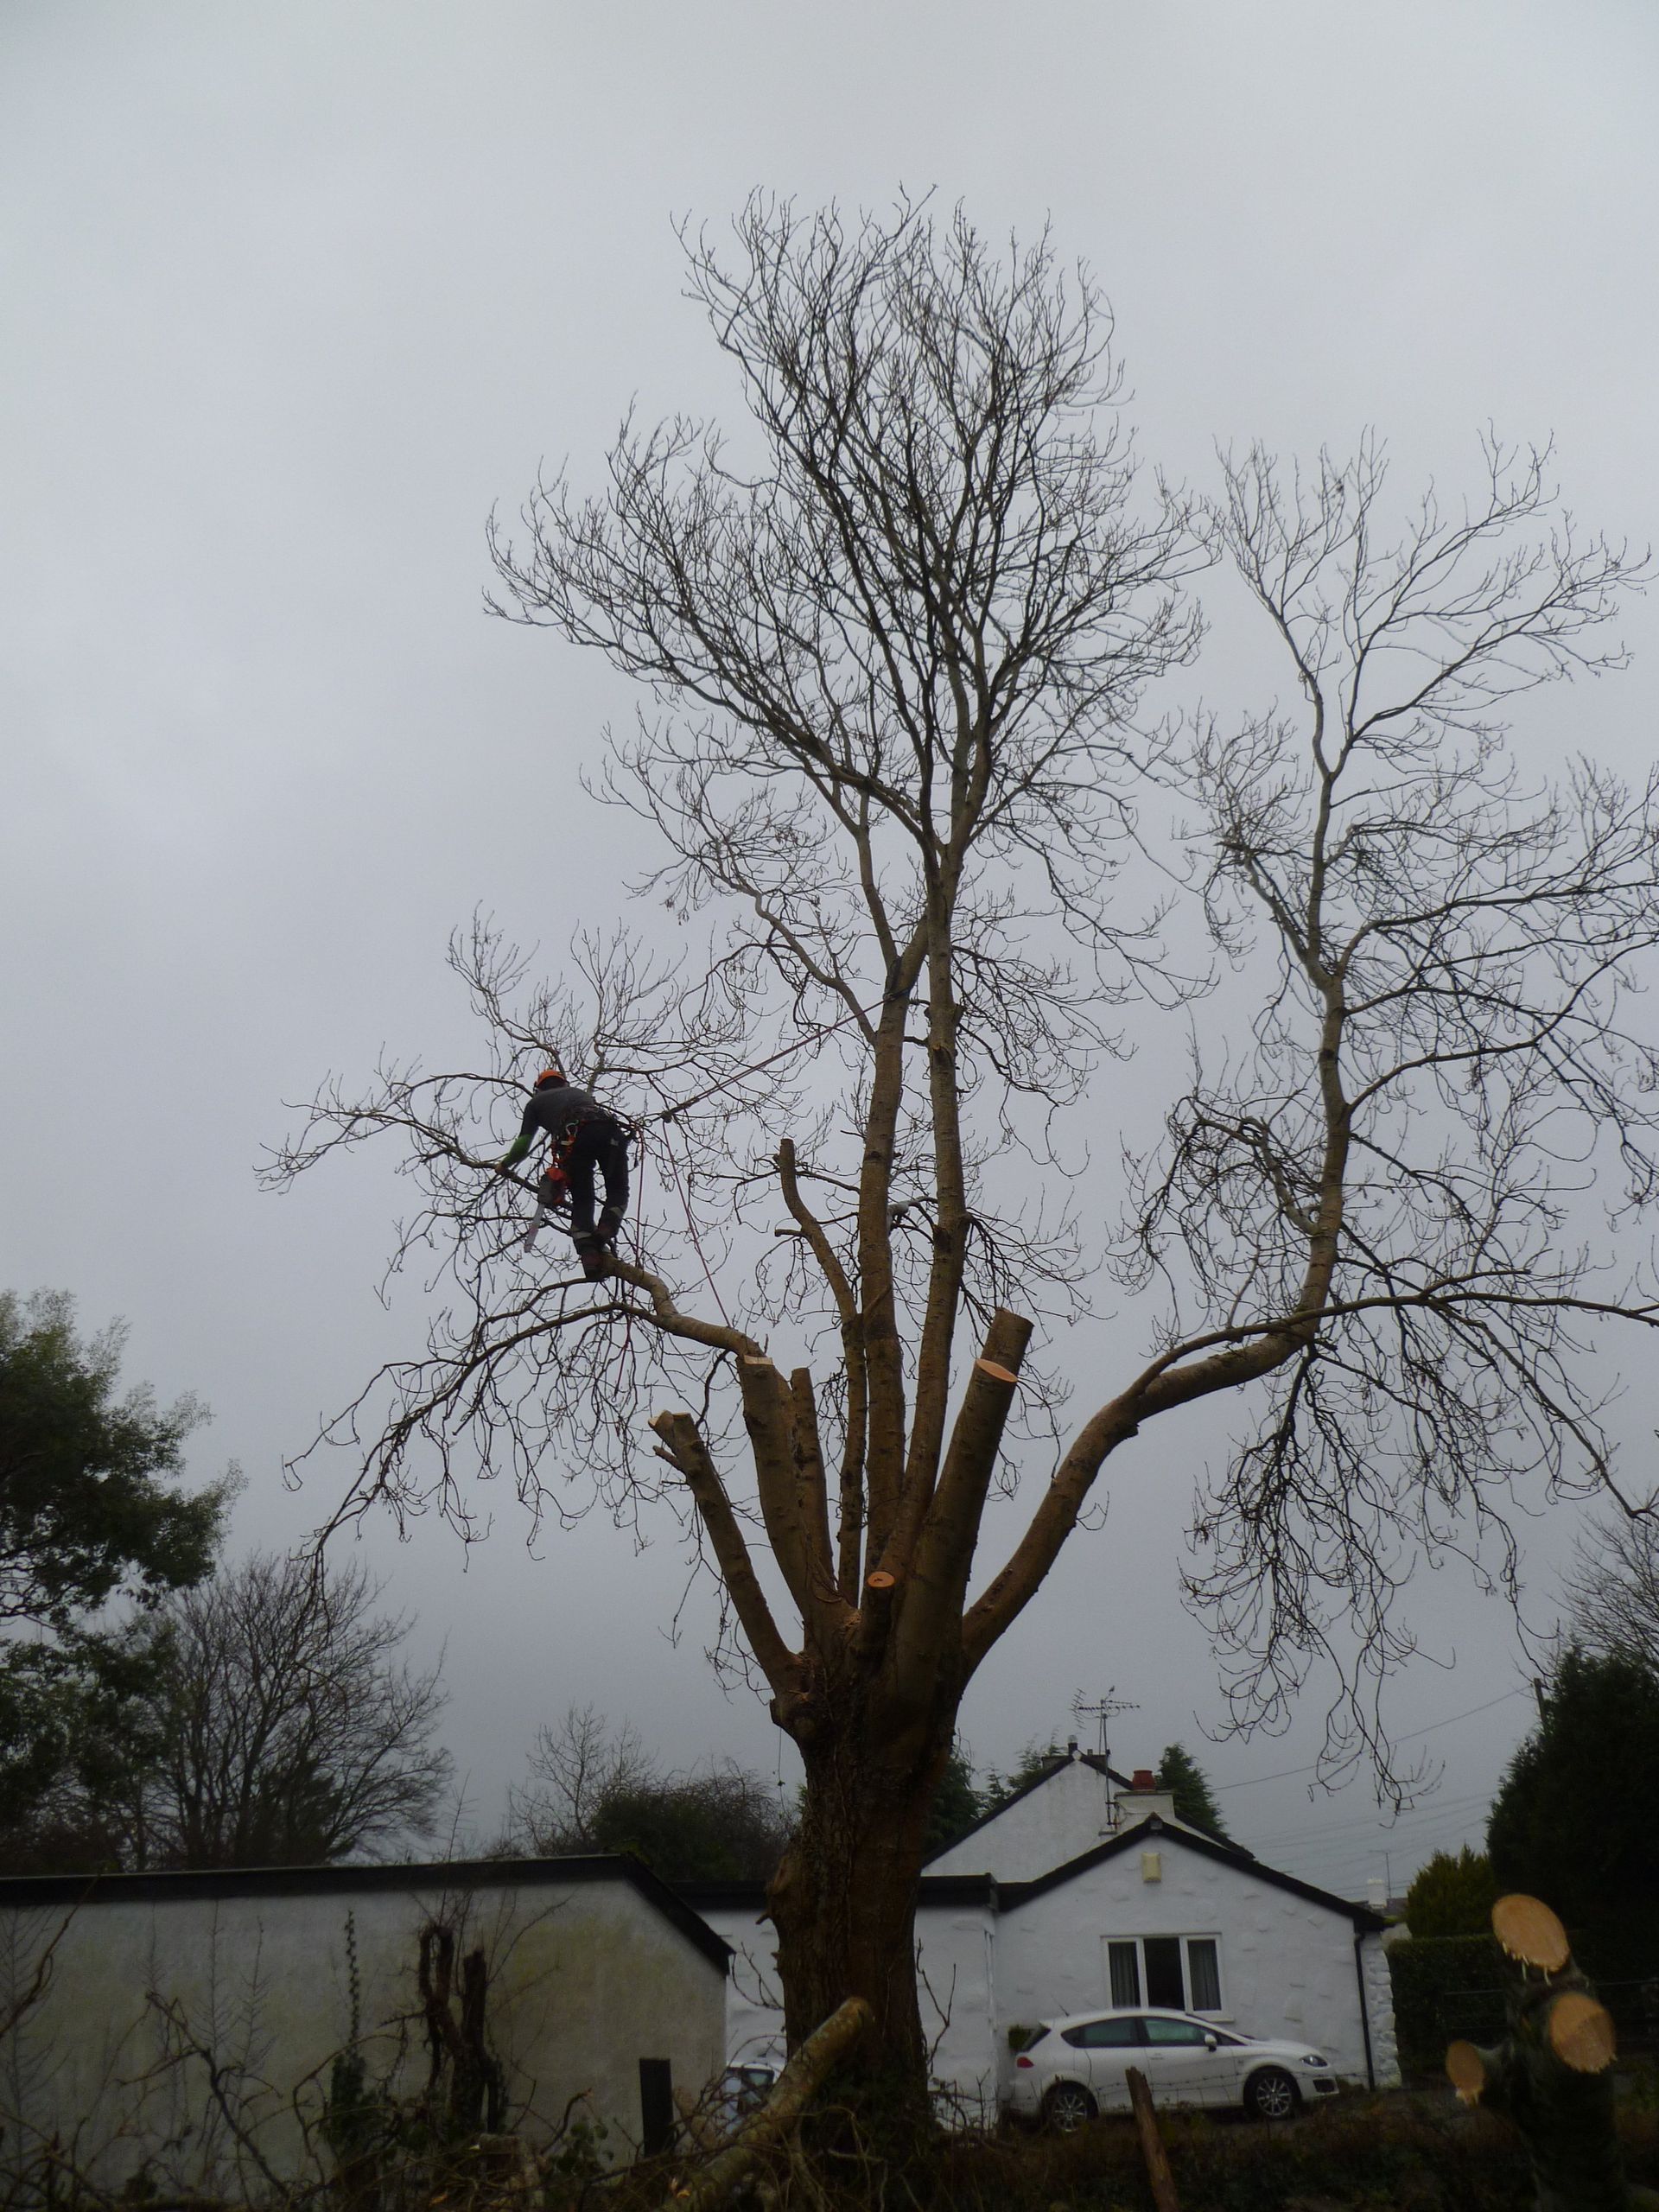 Tree surgeon in the process of dismantling the Ash tree over the garage.